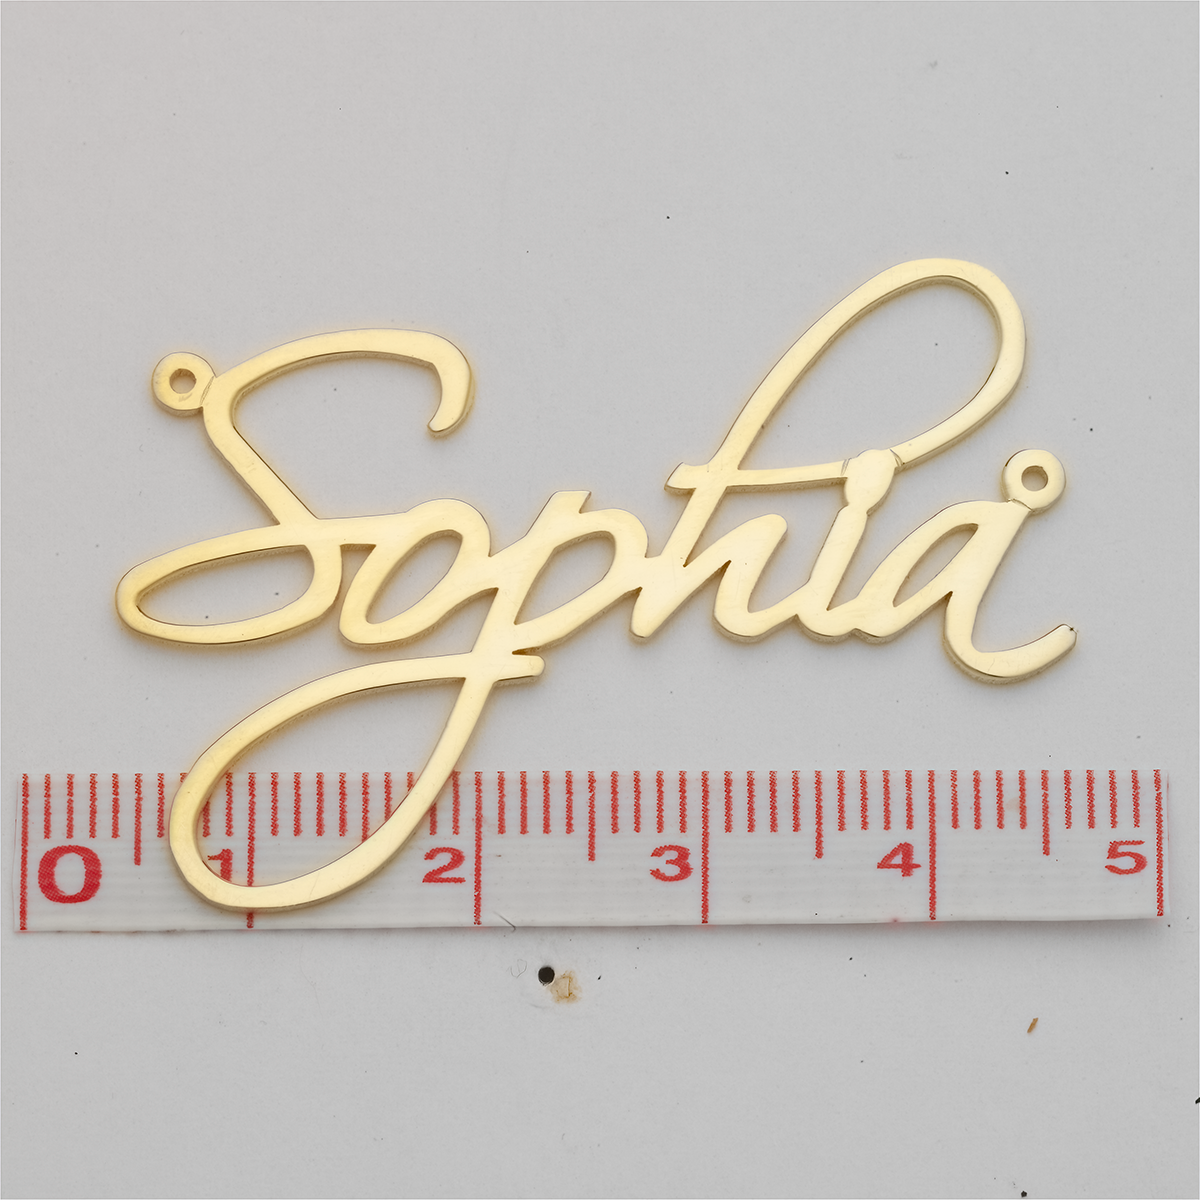 Cursive Nameplate Necklace Style 3